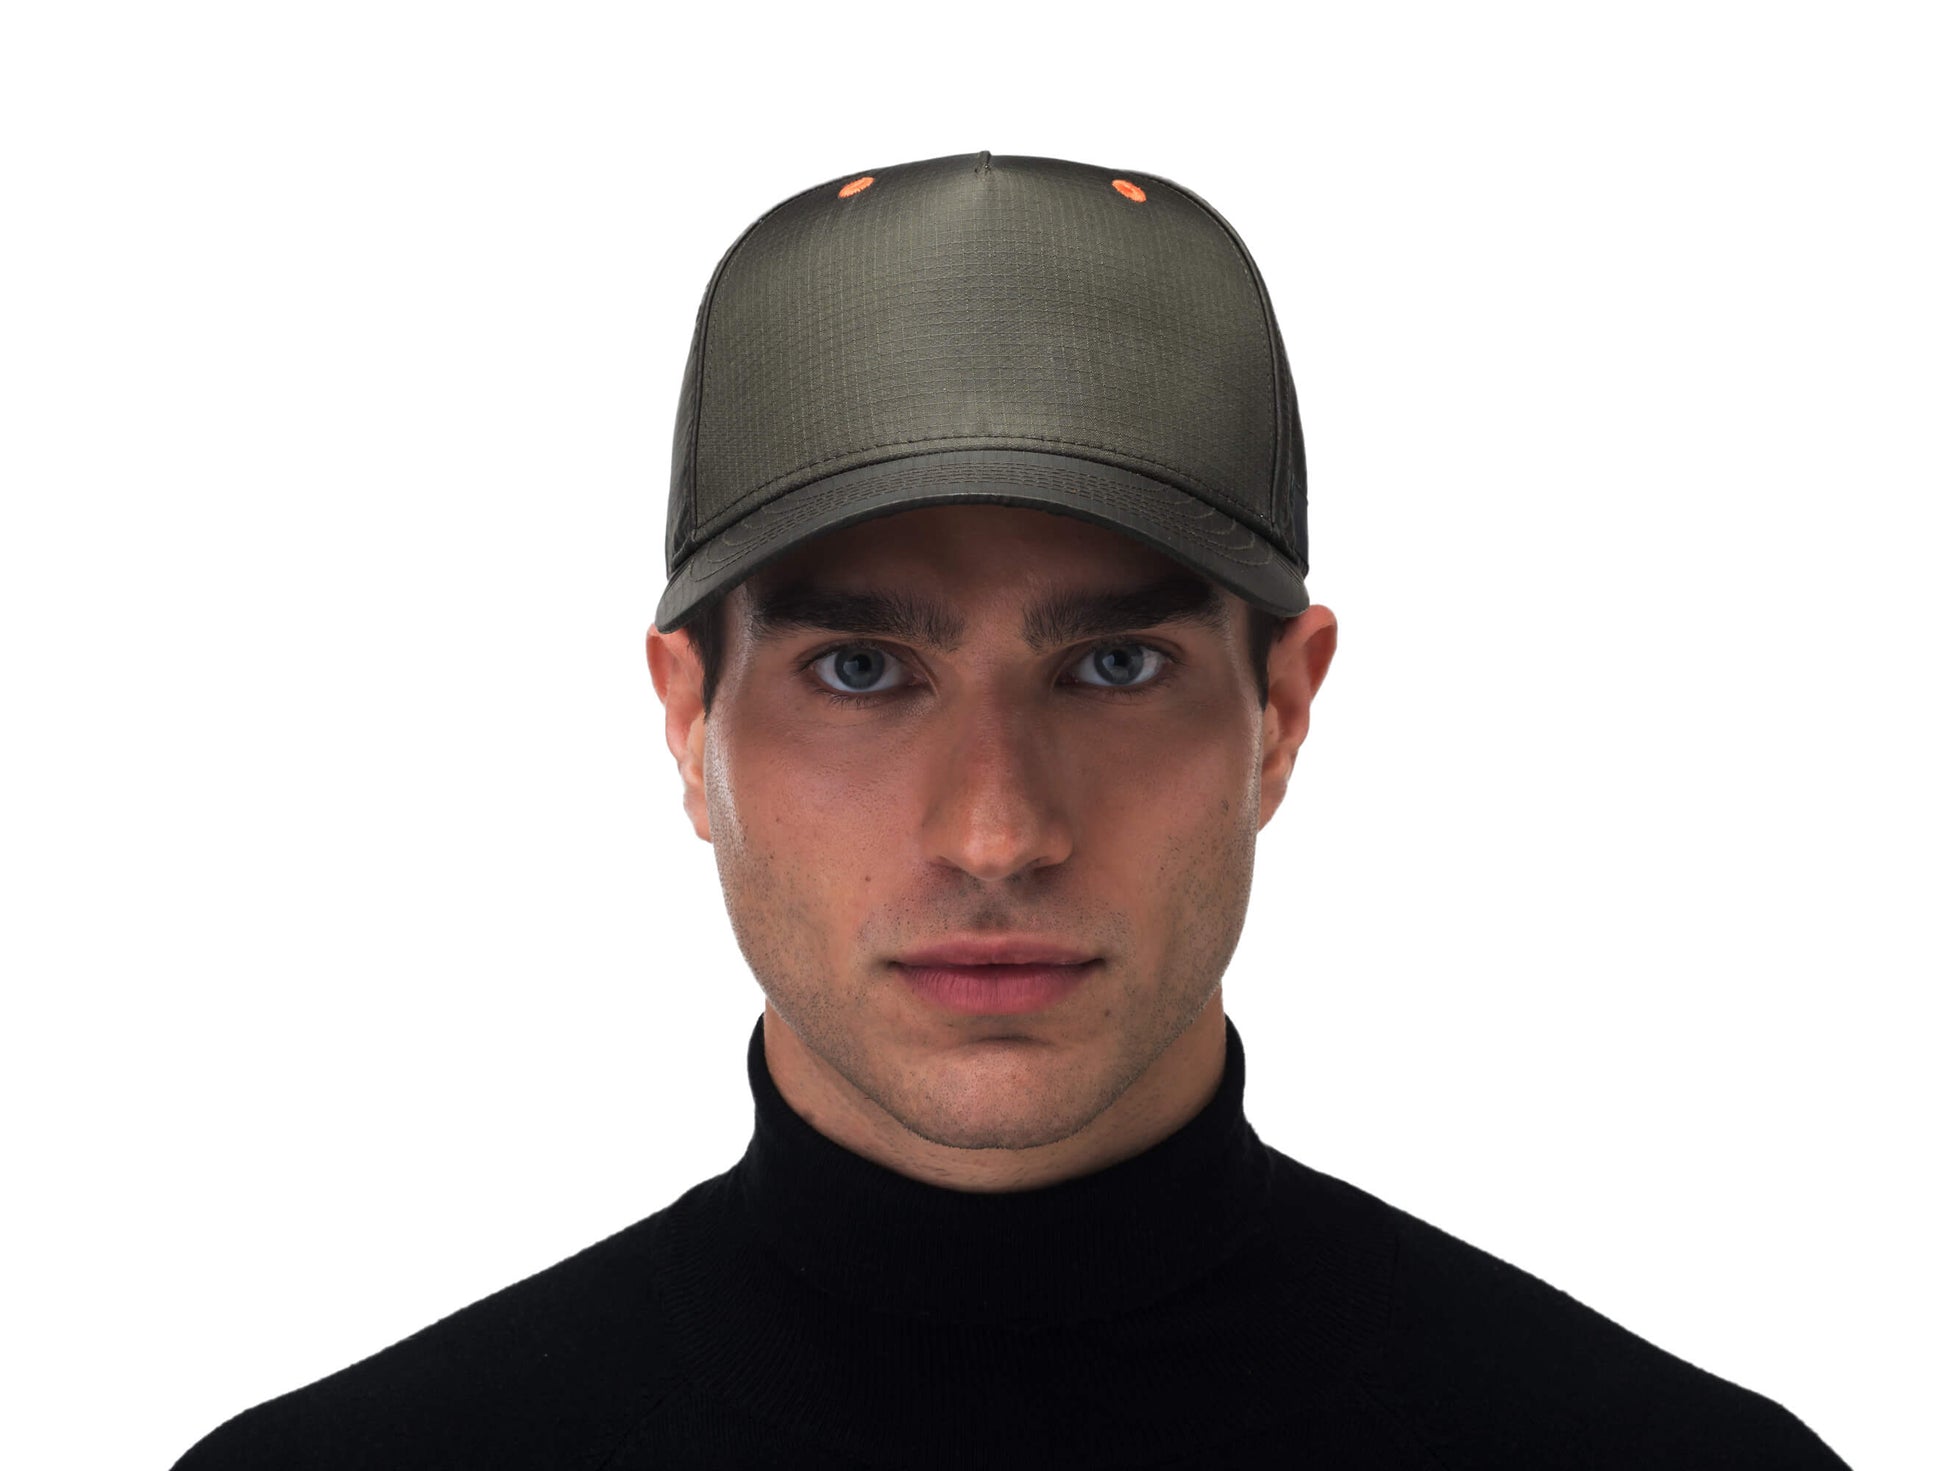 Unisex 5 panel baseball cap with adjustable back and contrast colour detailing in Dusty Olive